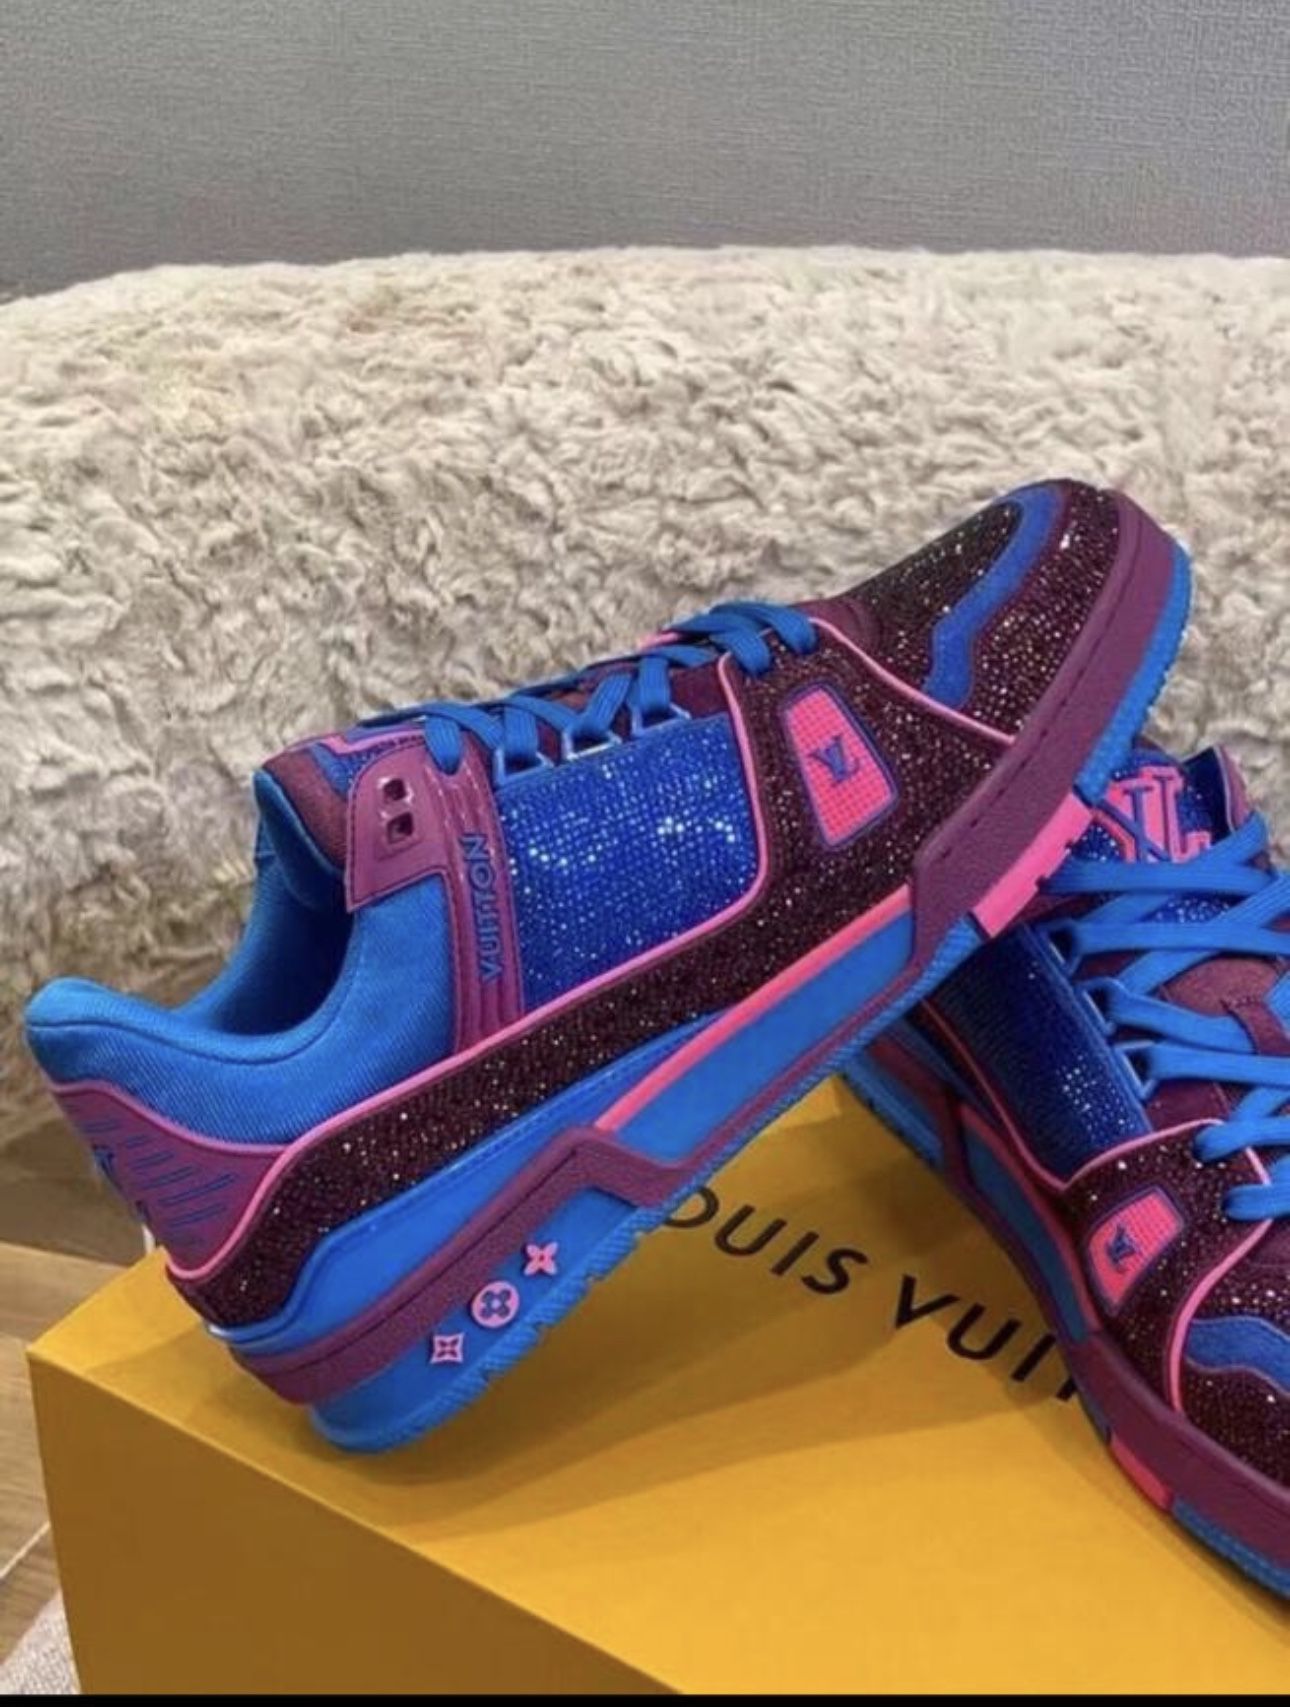 Louis Vuitton Sneakers Size 10. for Sale in Houston, TX - OfferUp